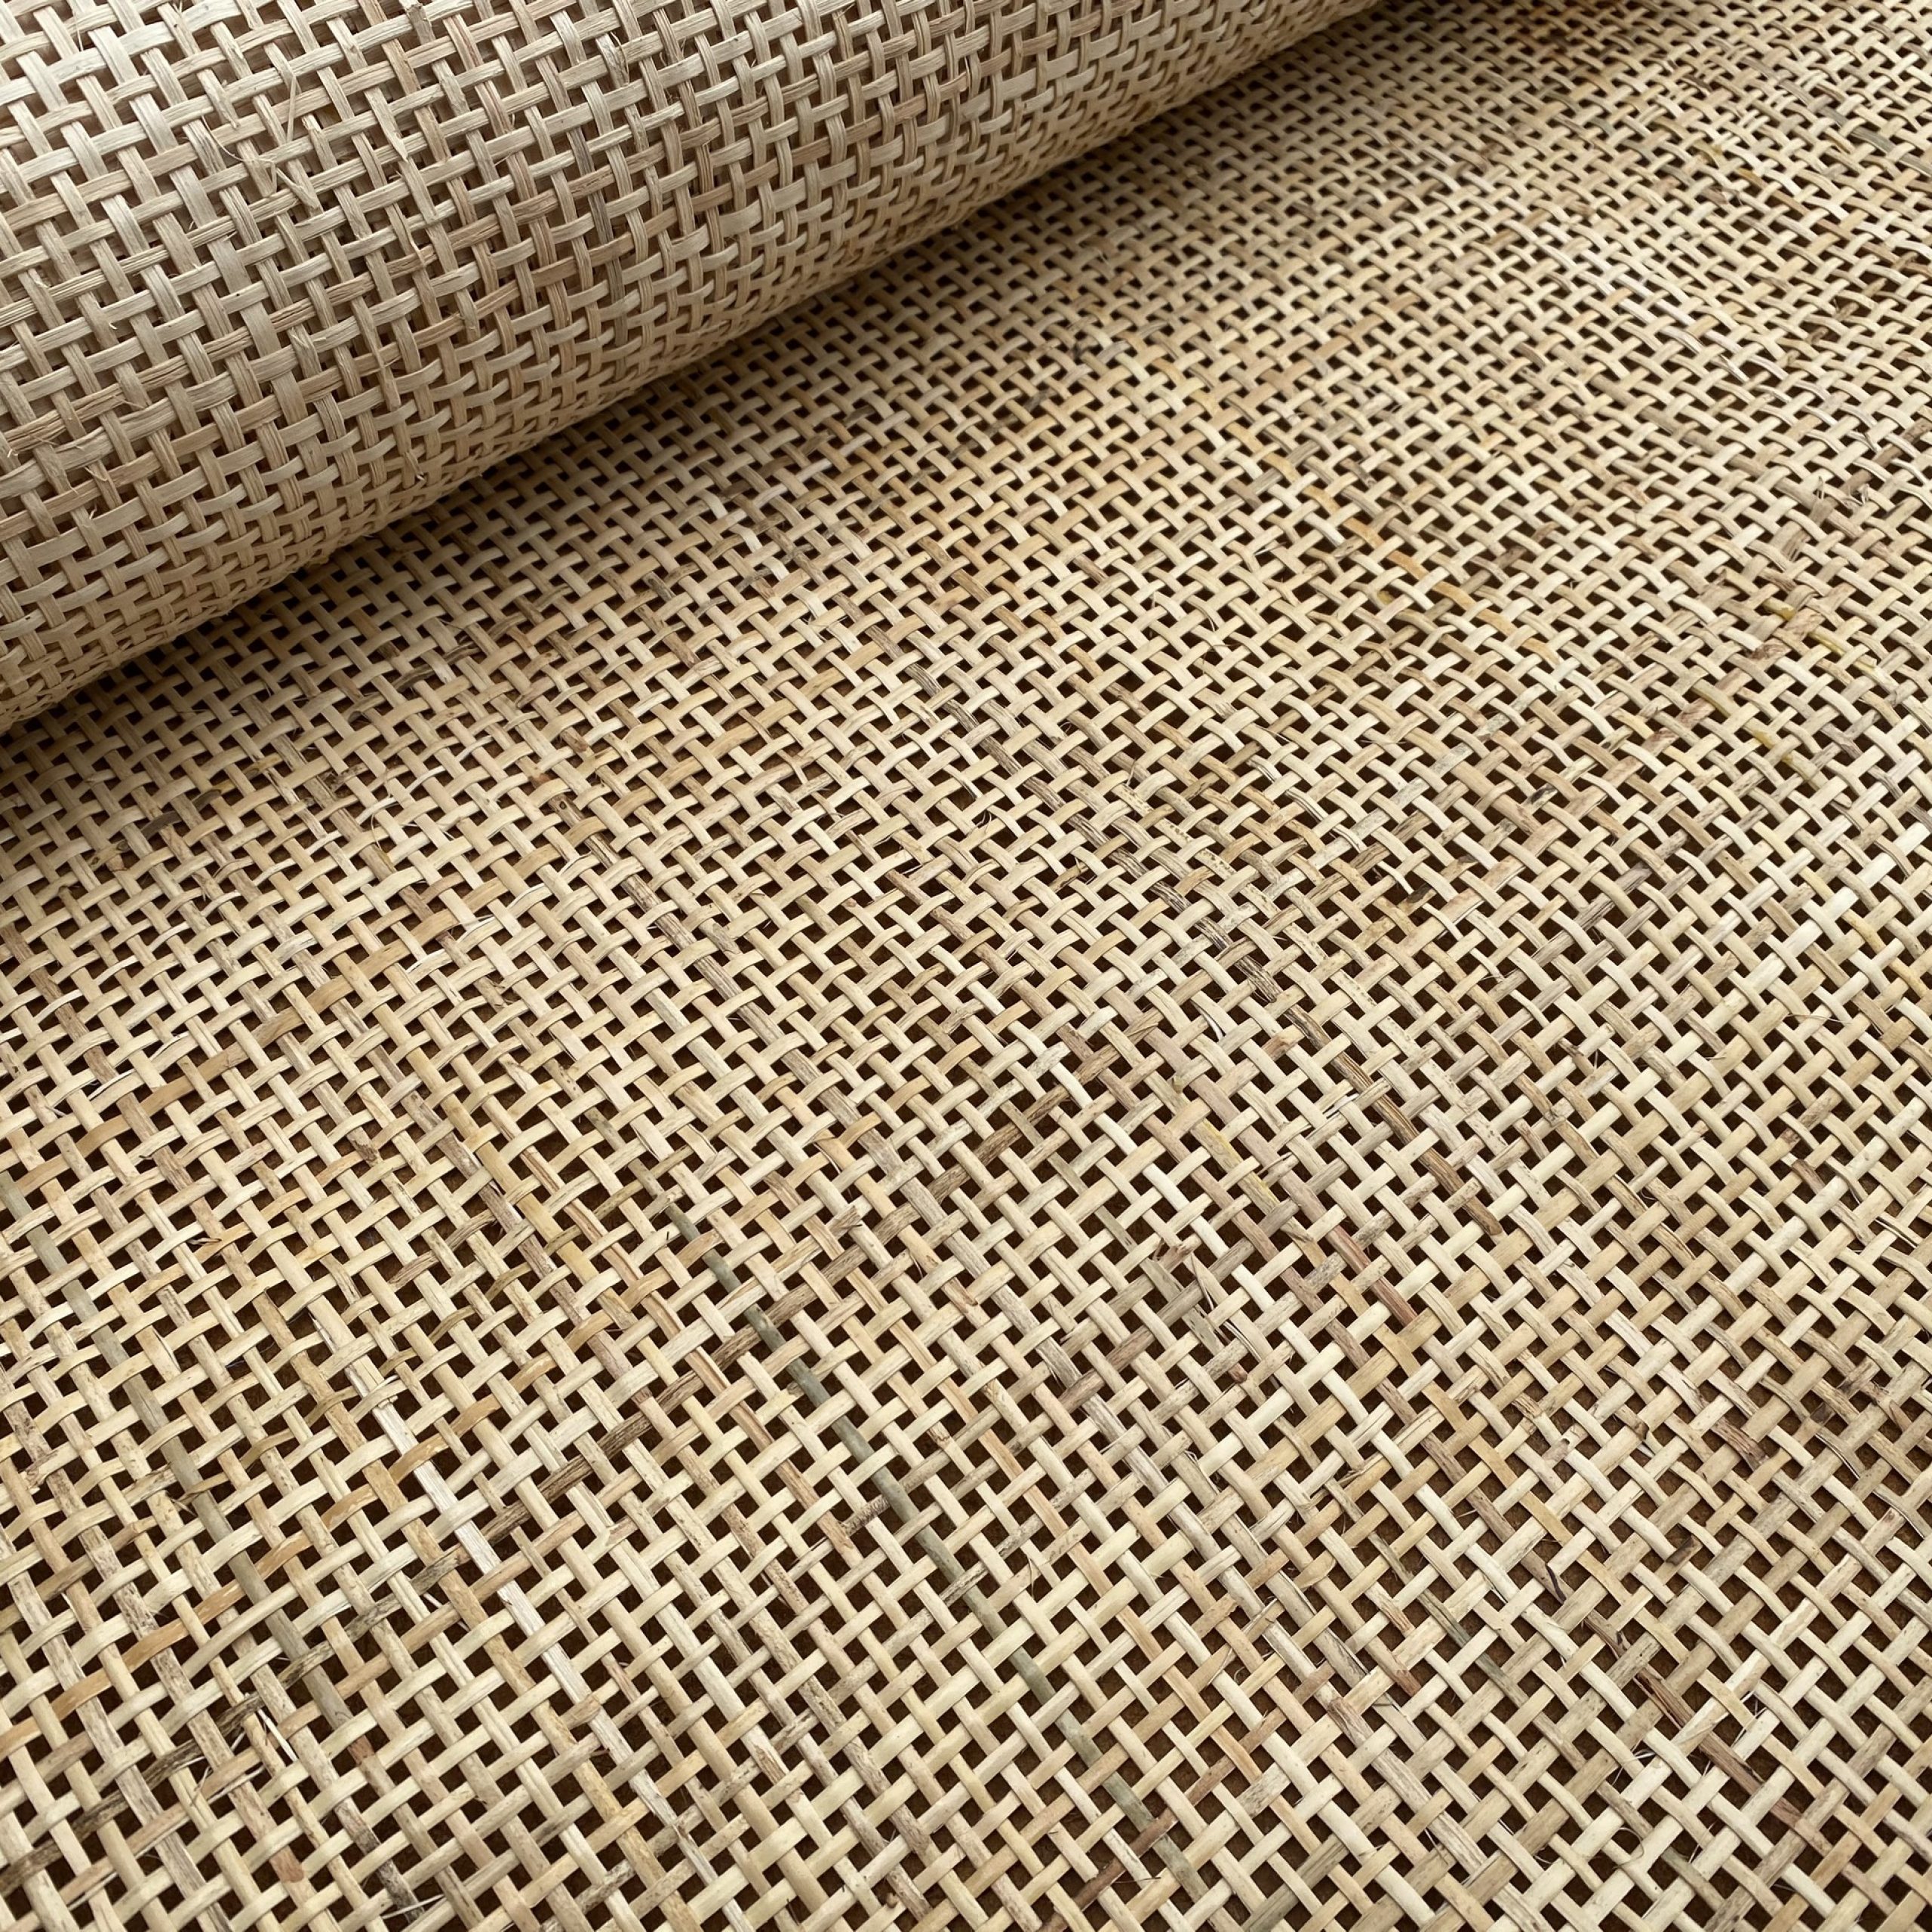 Oct Cane Rattan Webbing, Cane Mash, 24 Inches (Width)